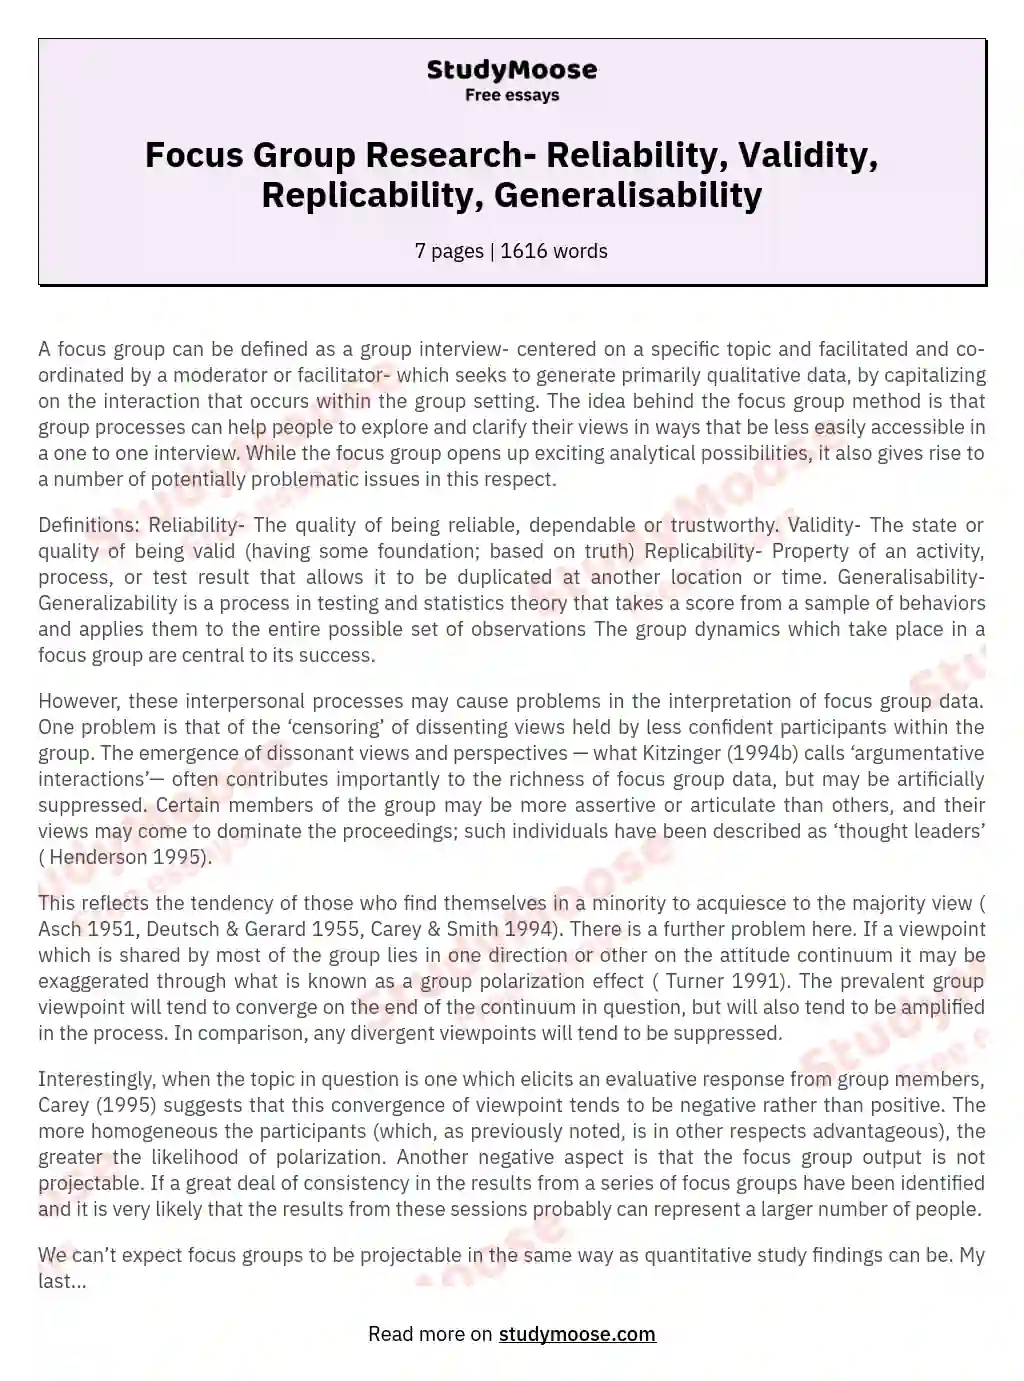 Focus Group Research- Reliability, Validity, Replicability, Generalisability essay